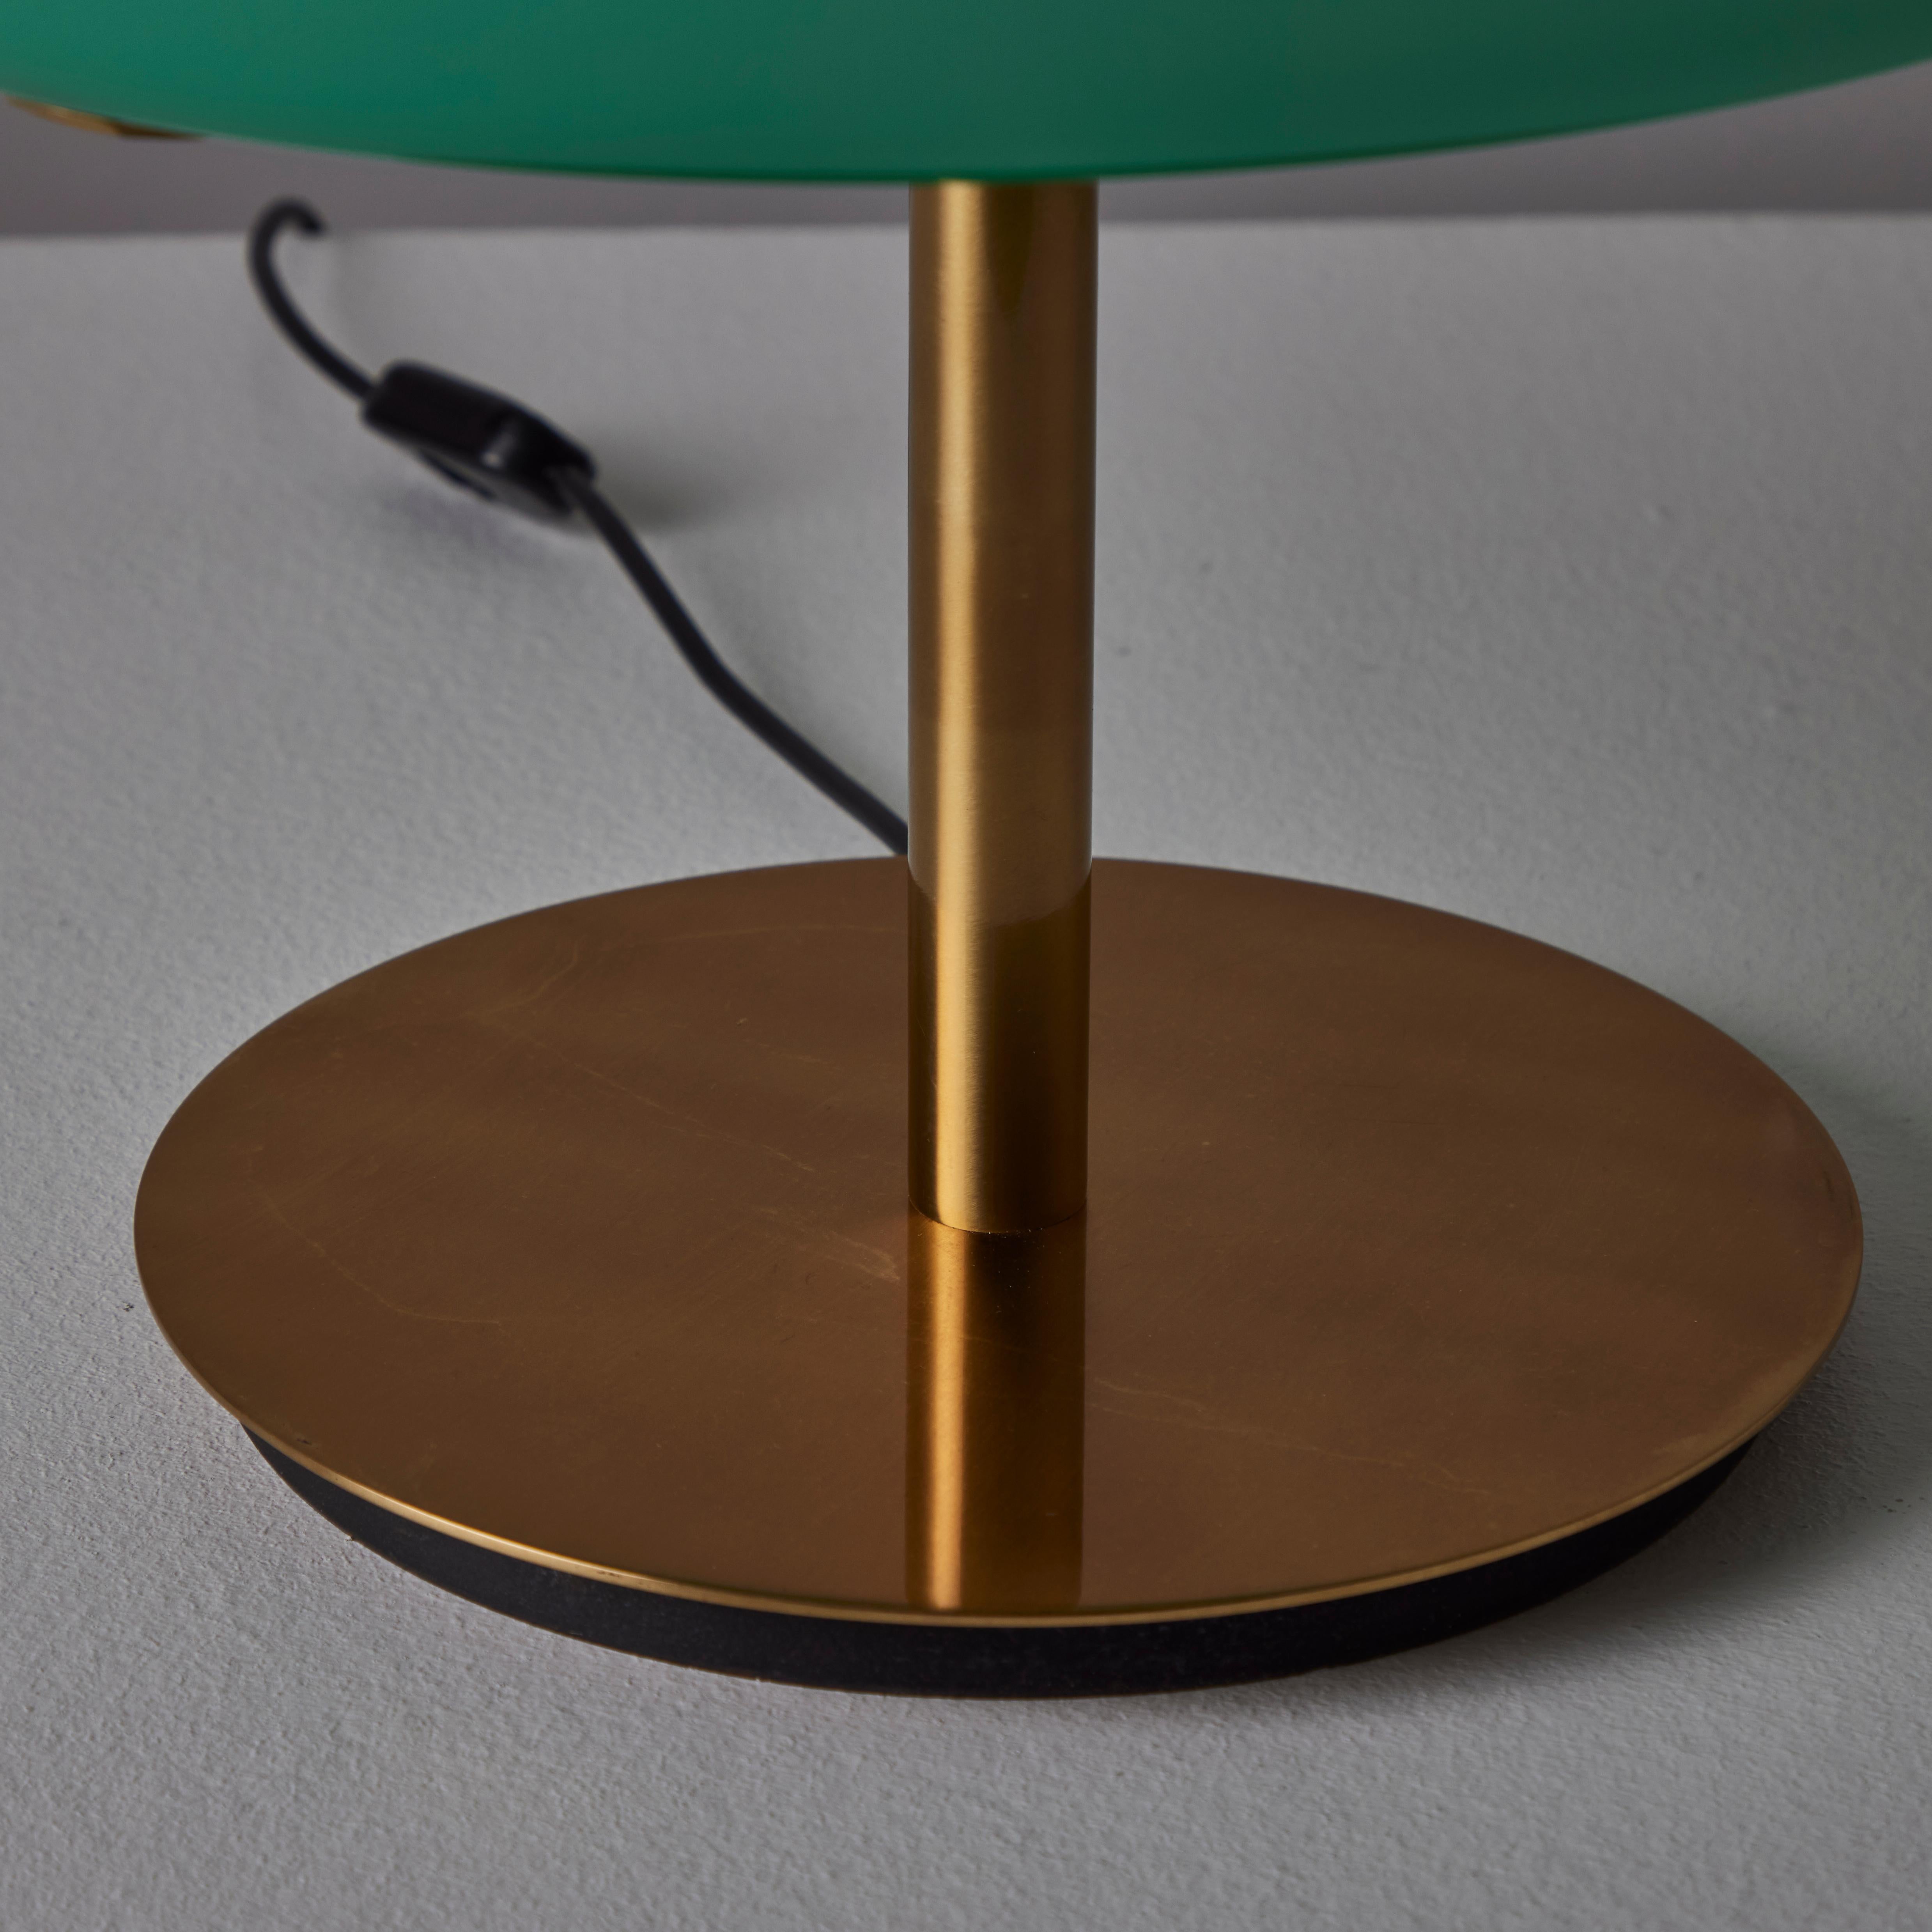 Mid-20th Century Rare 'Erse' Table Lamp by Vico Magistretti for Artemide For Sale